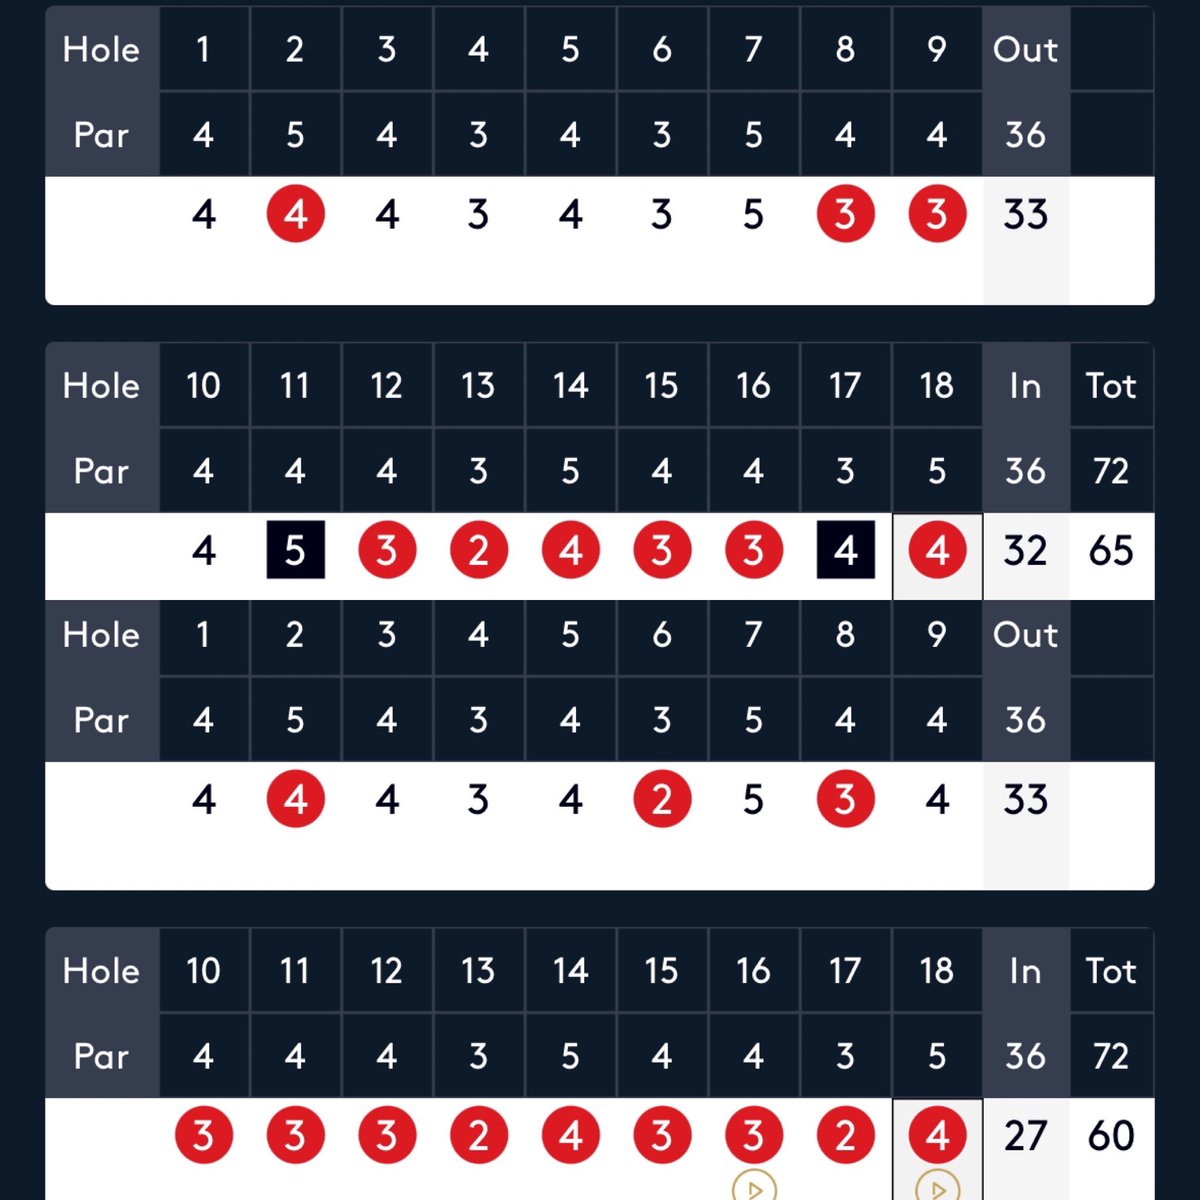 At the top my round, one of my best rounds I played all year. In the bottom @mattsjwallace round, 5 better than mine . @dpwtc